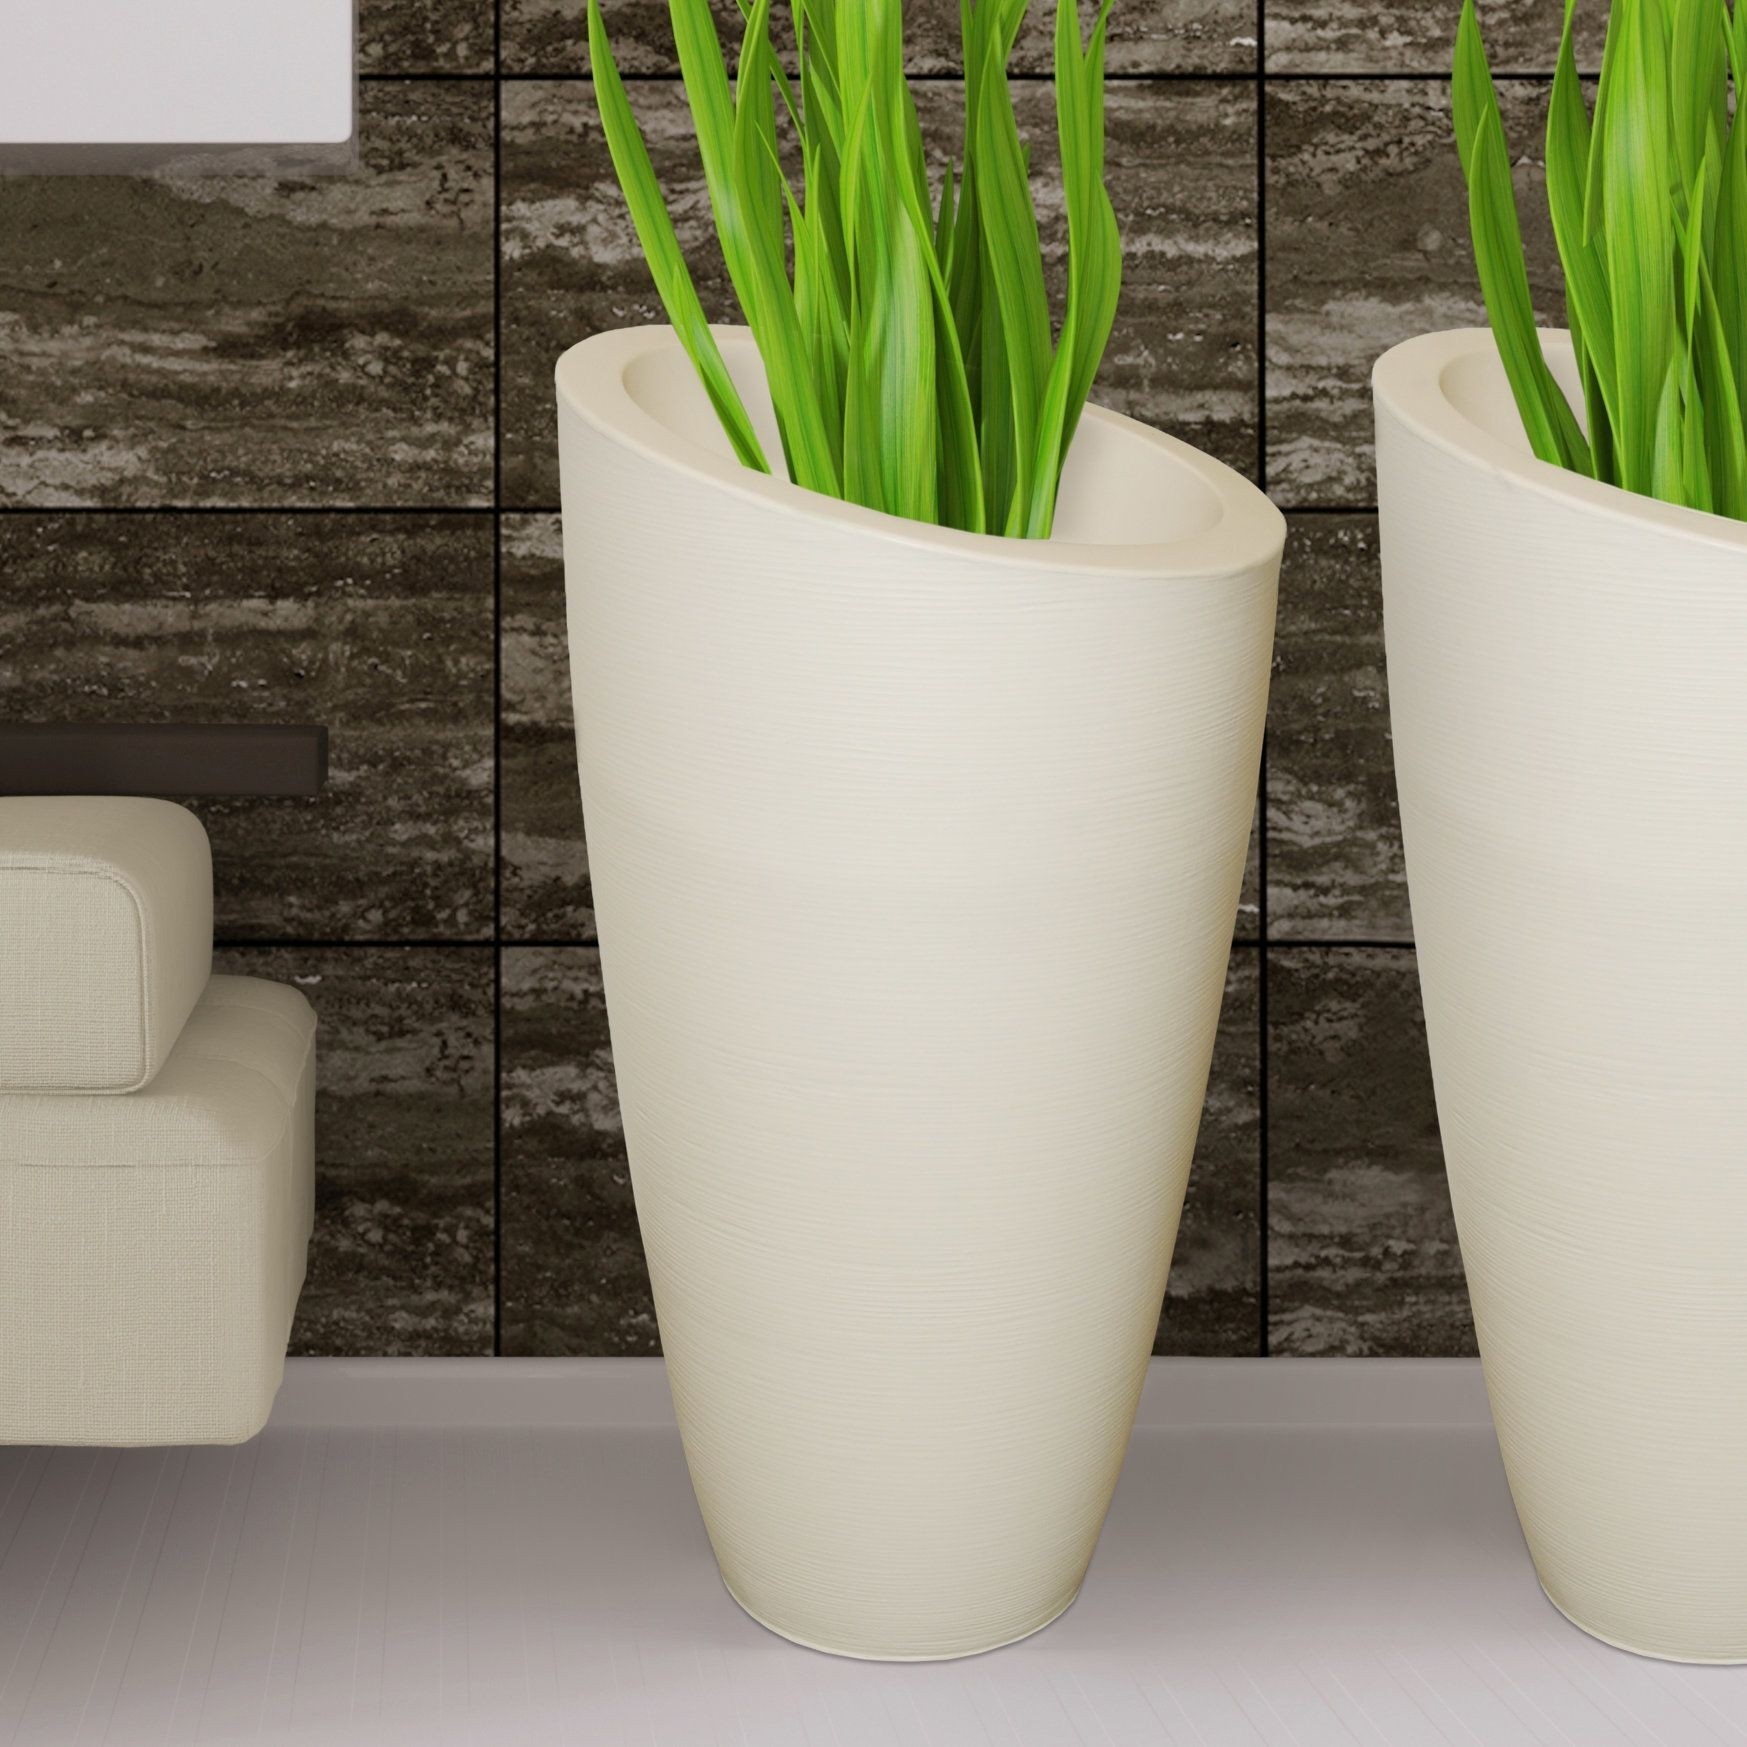 Planter Pots for 2020 - Ideas on Foter